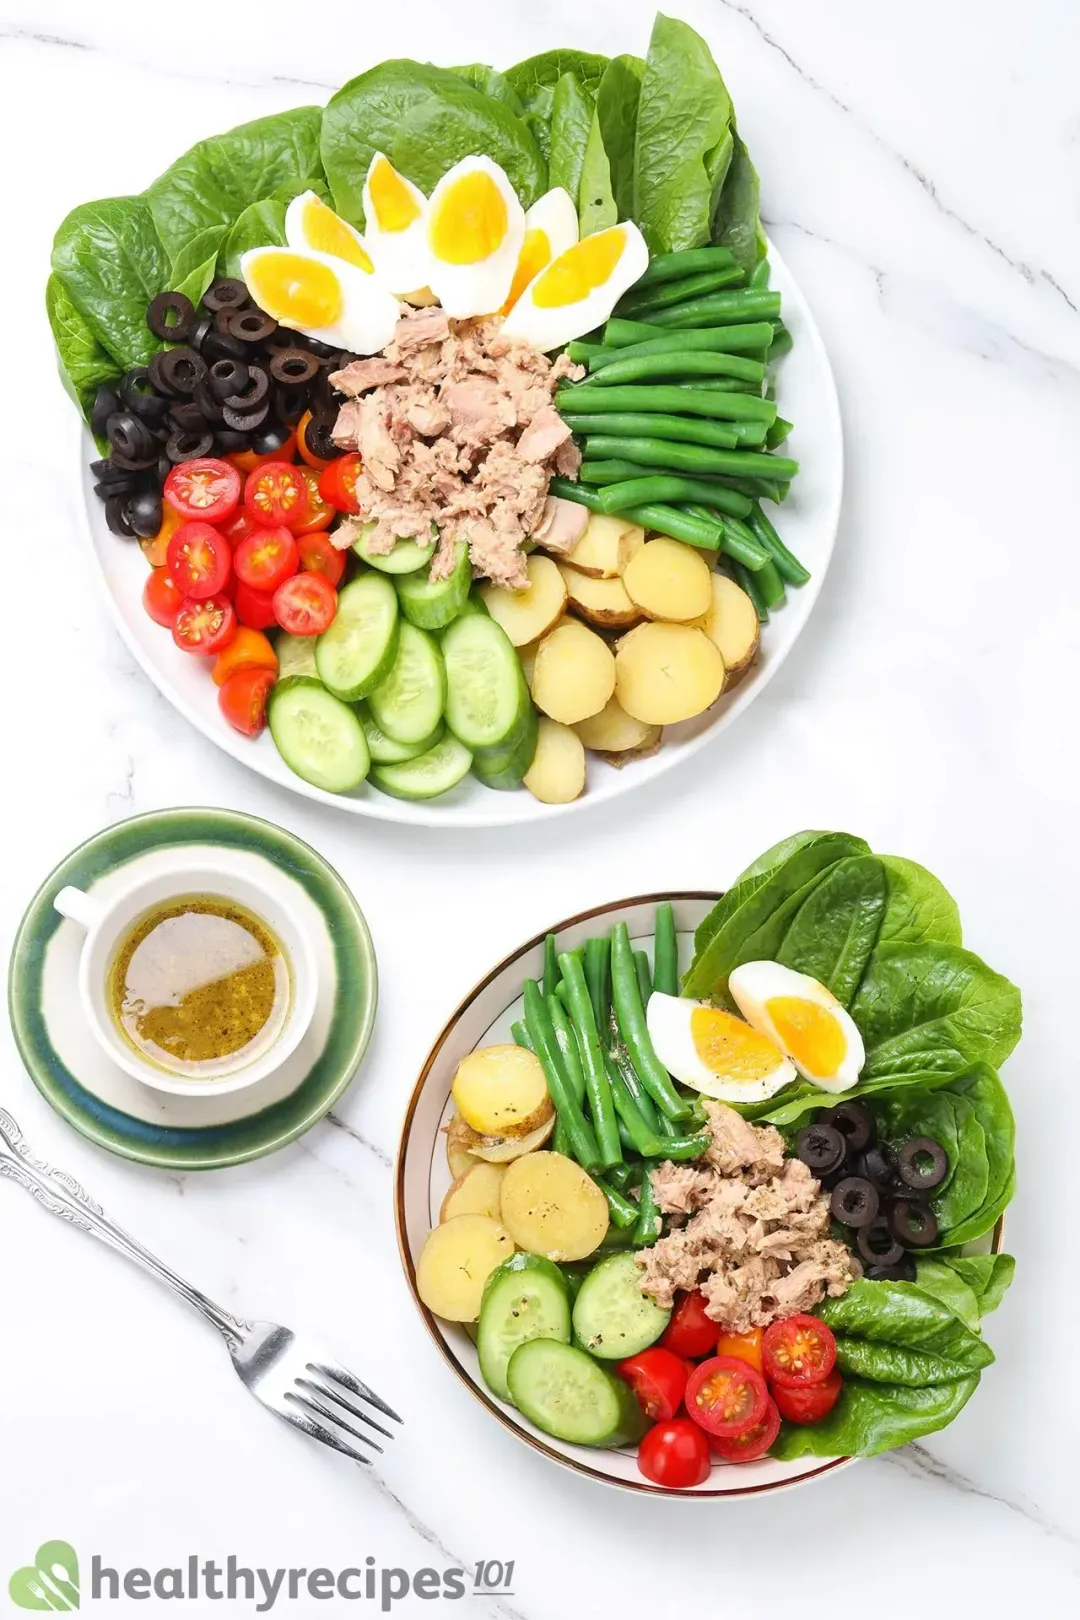 Two plates of Nicoise salad with tuna, eggs, olives, tomatoes, potatoes, green beans, and cucumbers, next to a fork and dressing